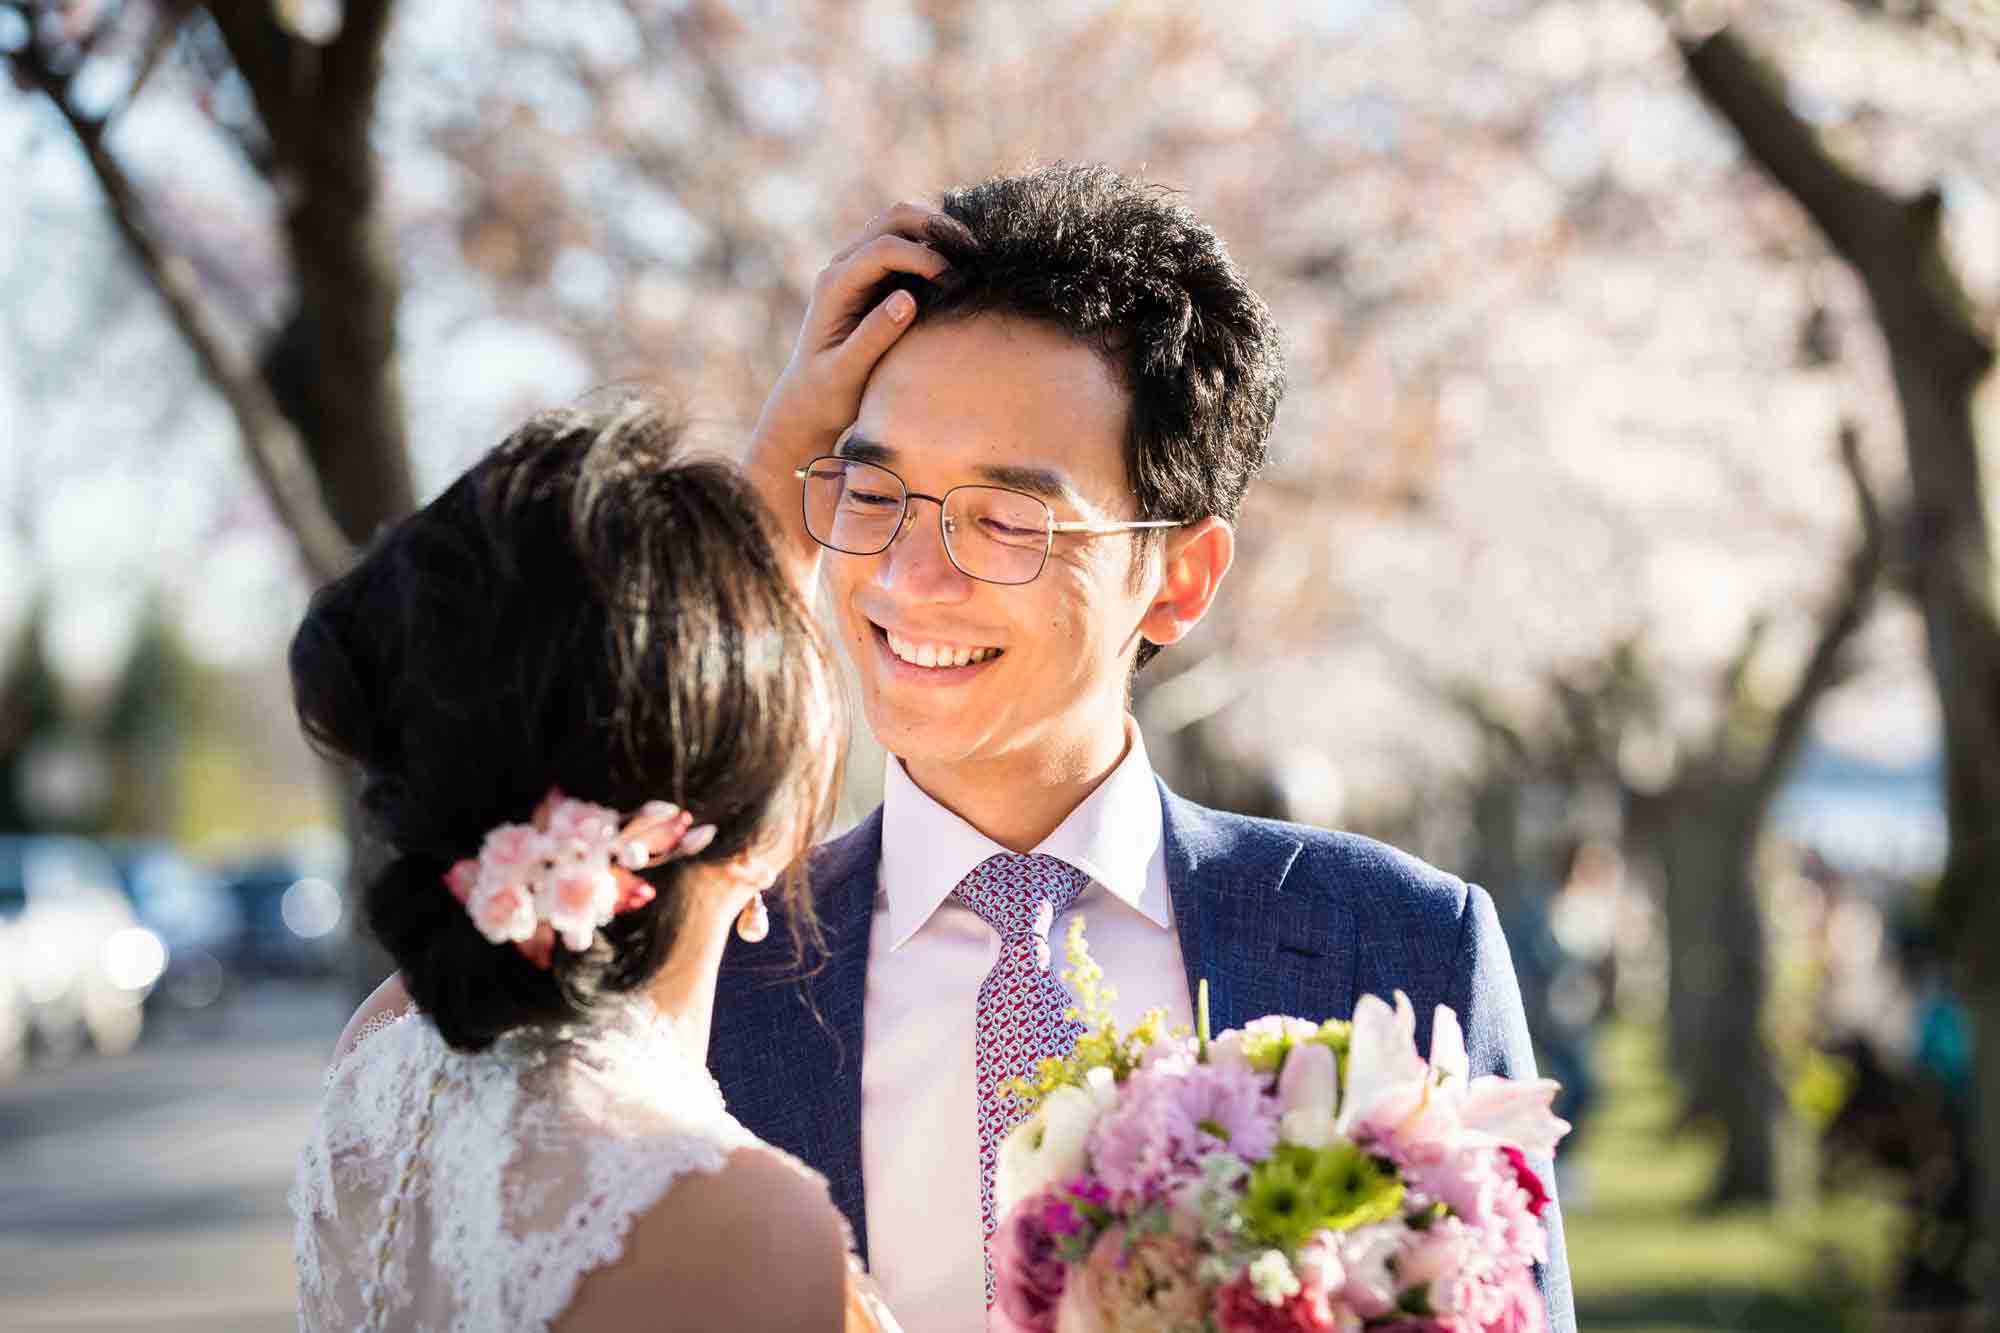 Woman holding flowers and touching man's hair Couple walking under cherry blossom trees during a Roosevelt Island engagement photo shoot